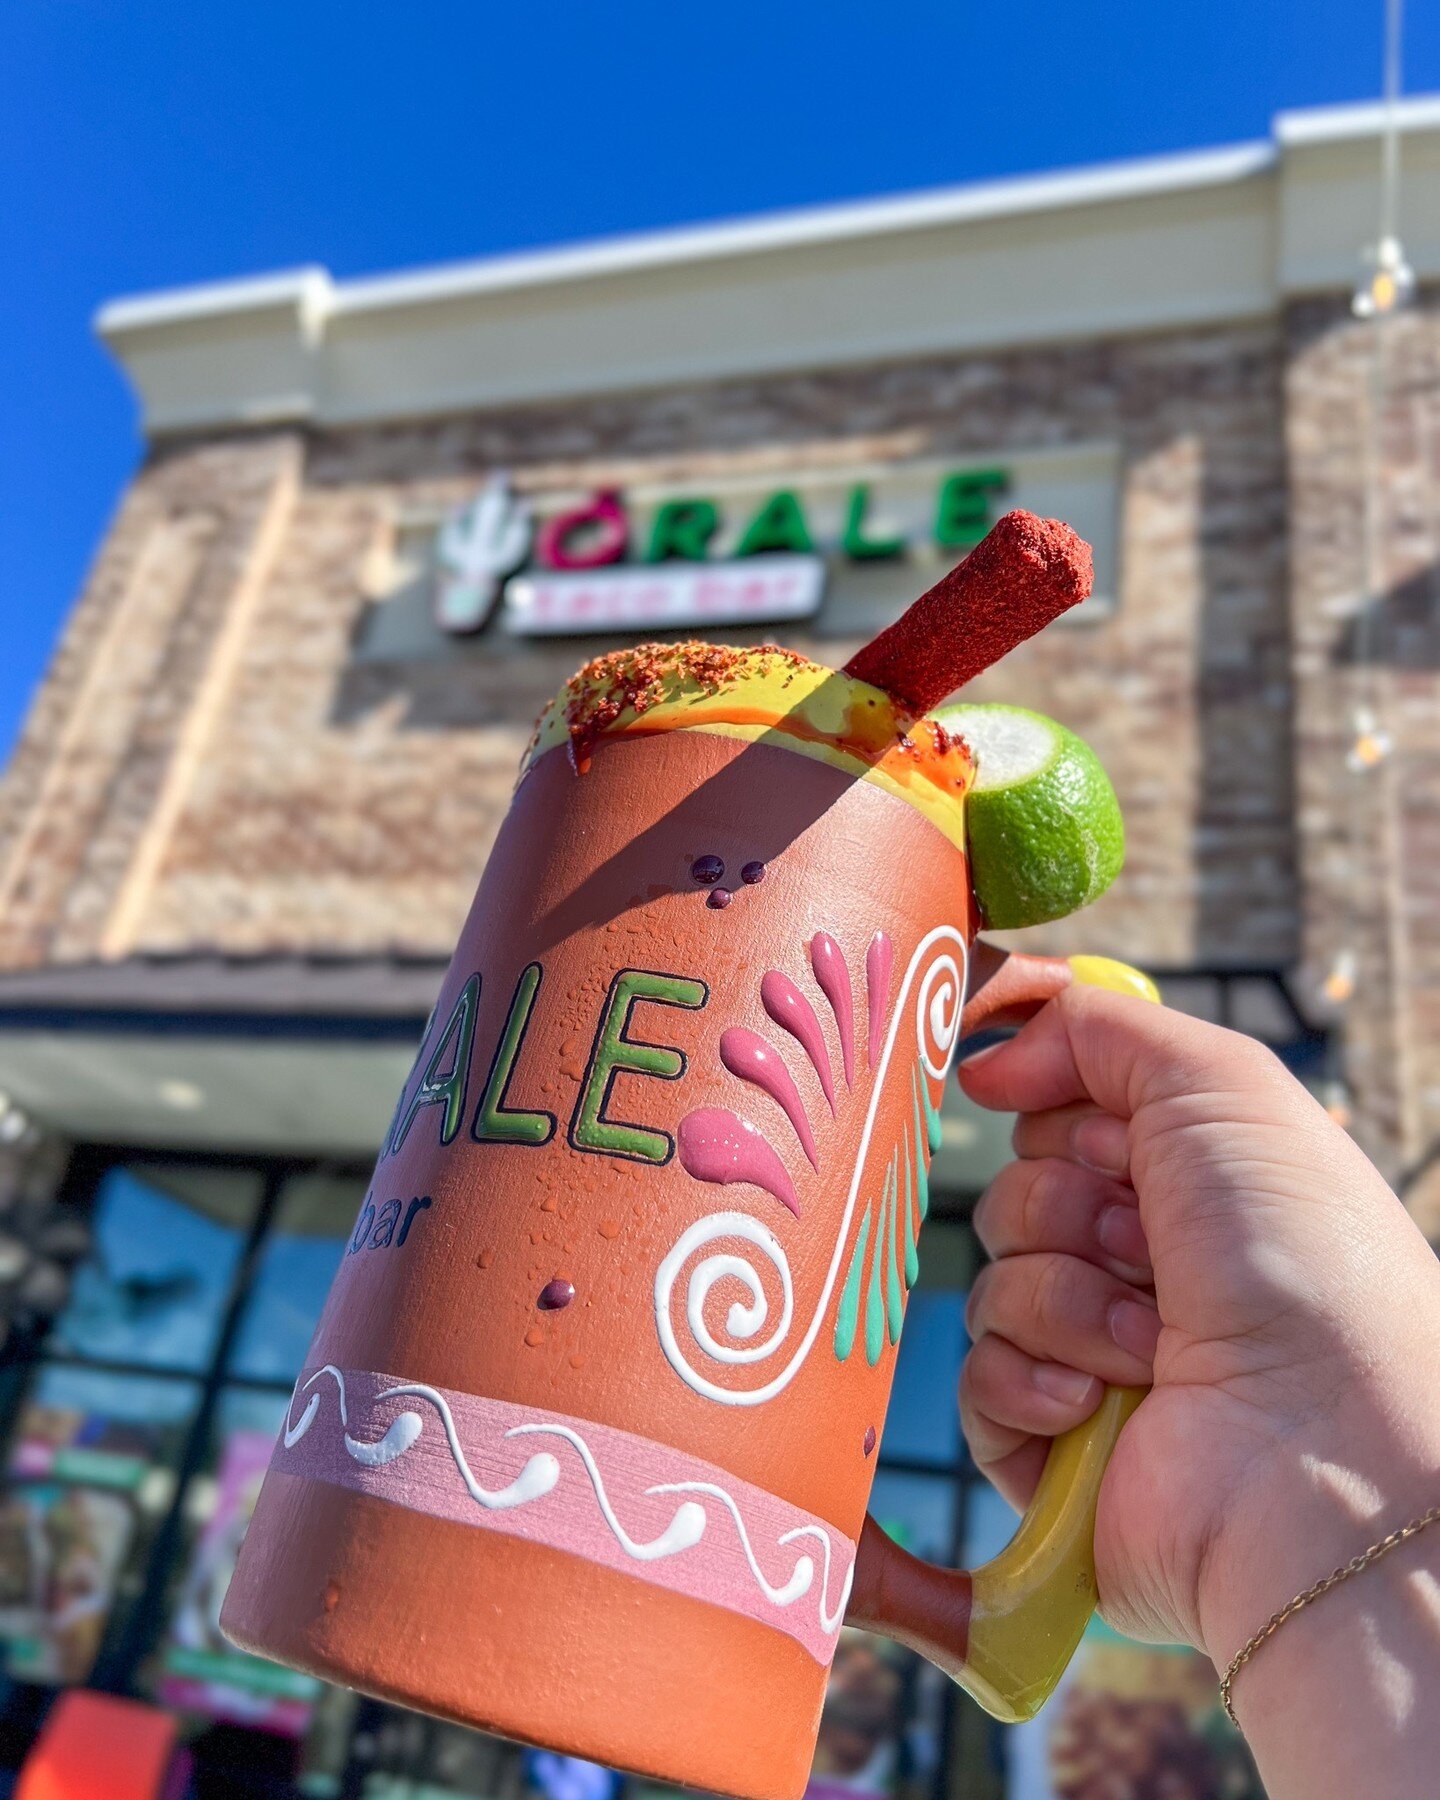 We hope everyone has a great weekend! ☀️ 

We will be CLOSED this Easter Sunday to spend time with our families. Happy Easter to you all! 🐰

  #oraletacobar #taqueria #southernpines #mexicanfood #comidamexicana #southernpinesfood #southernpinesnc